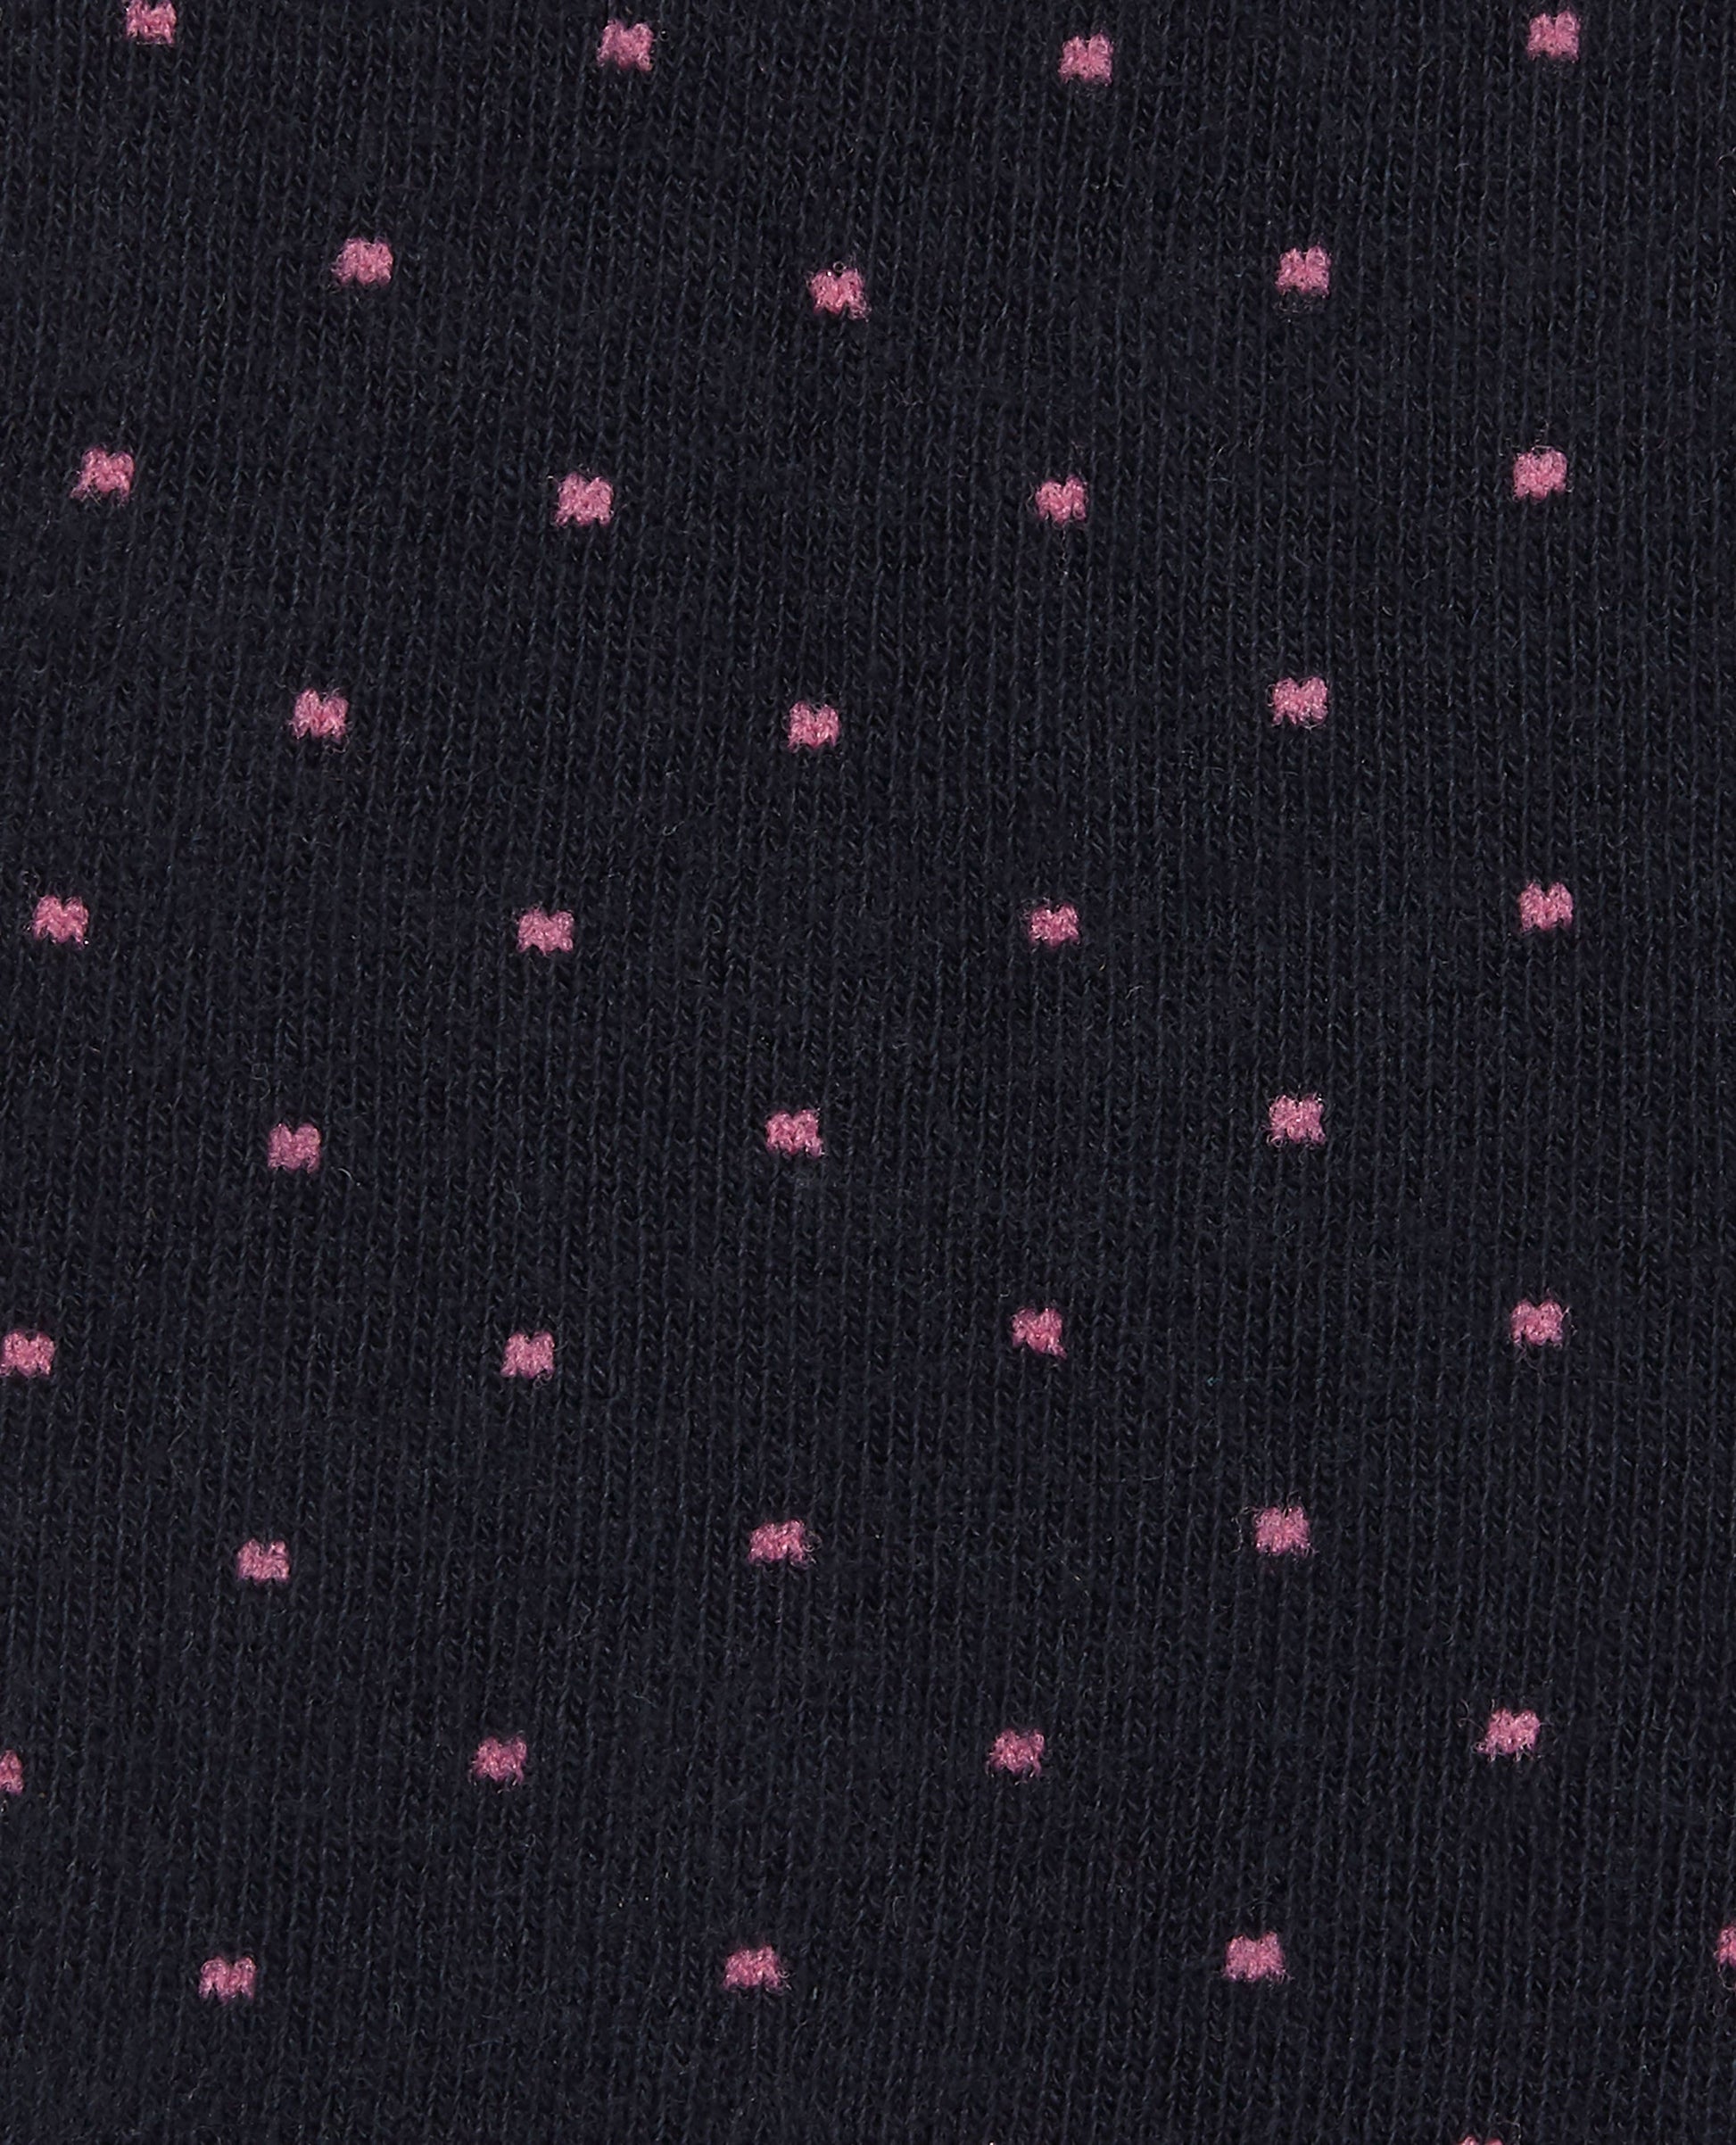 Image 2 of Navy and Pink Spot Socks